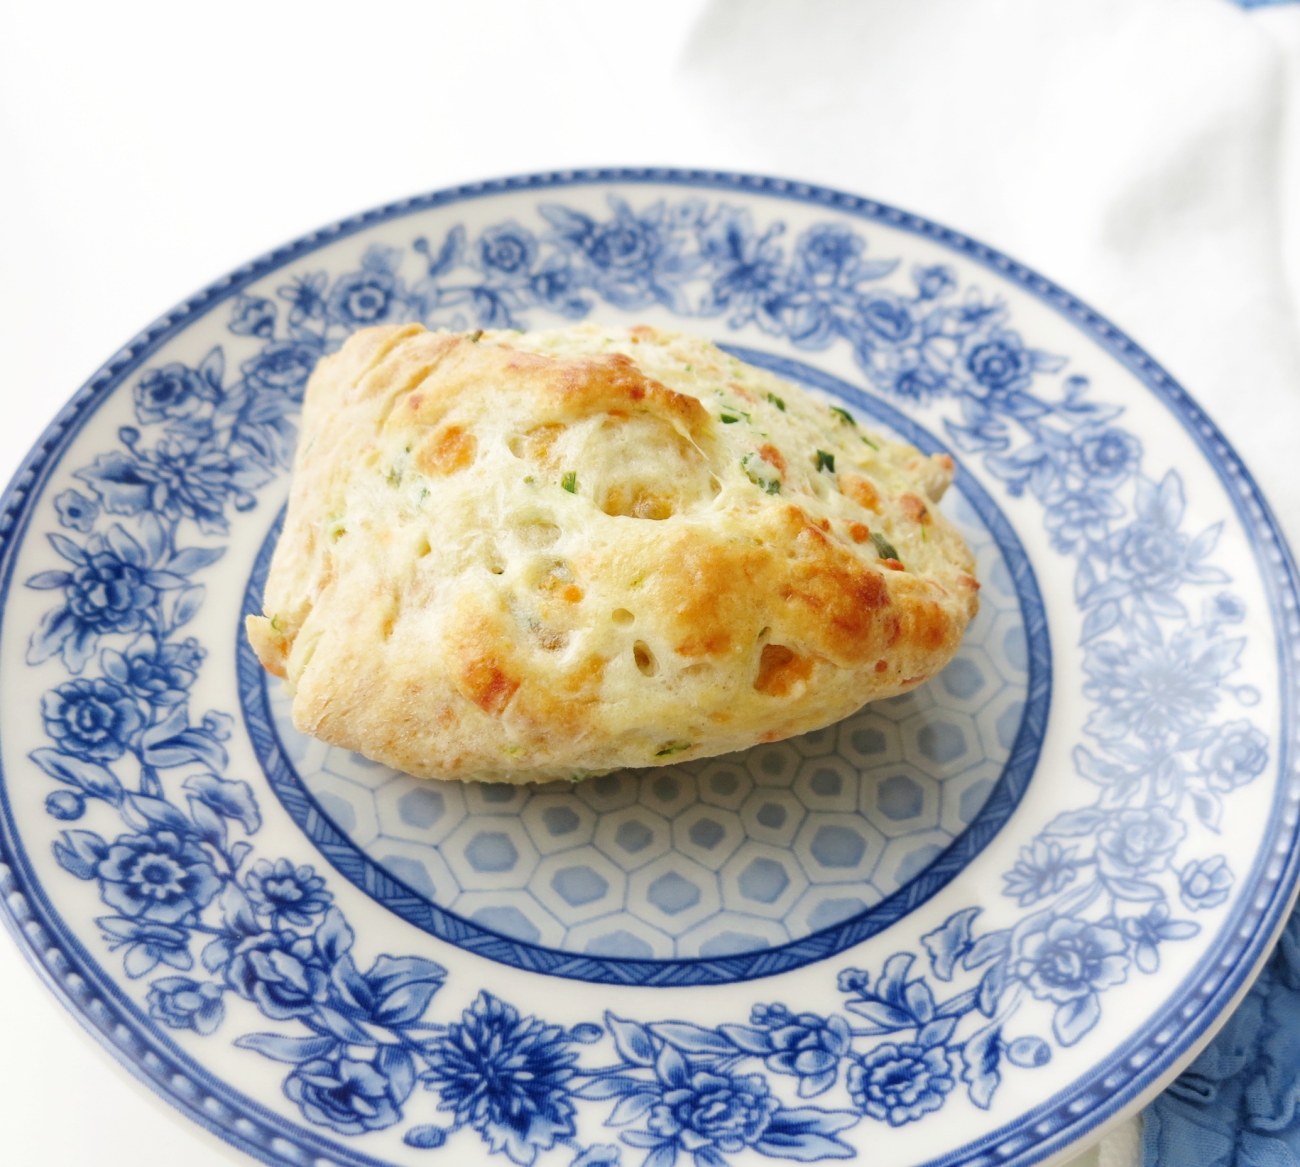 Cheddar and Chive Scones
